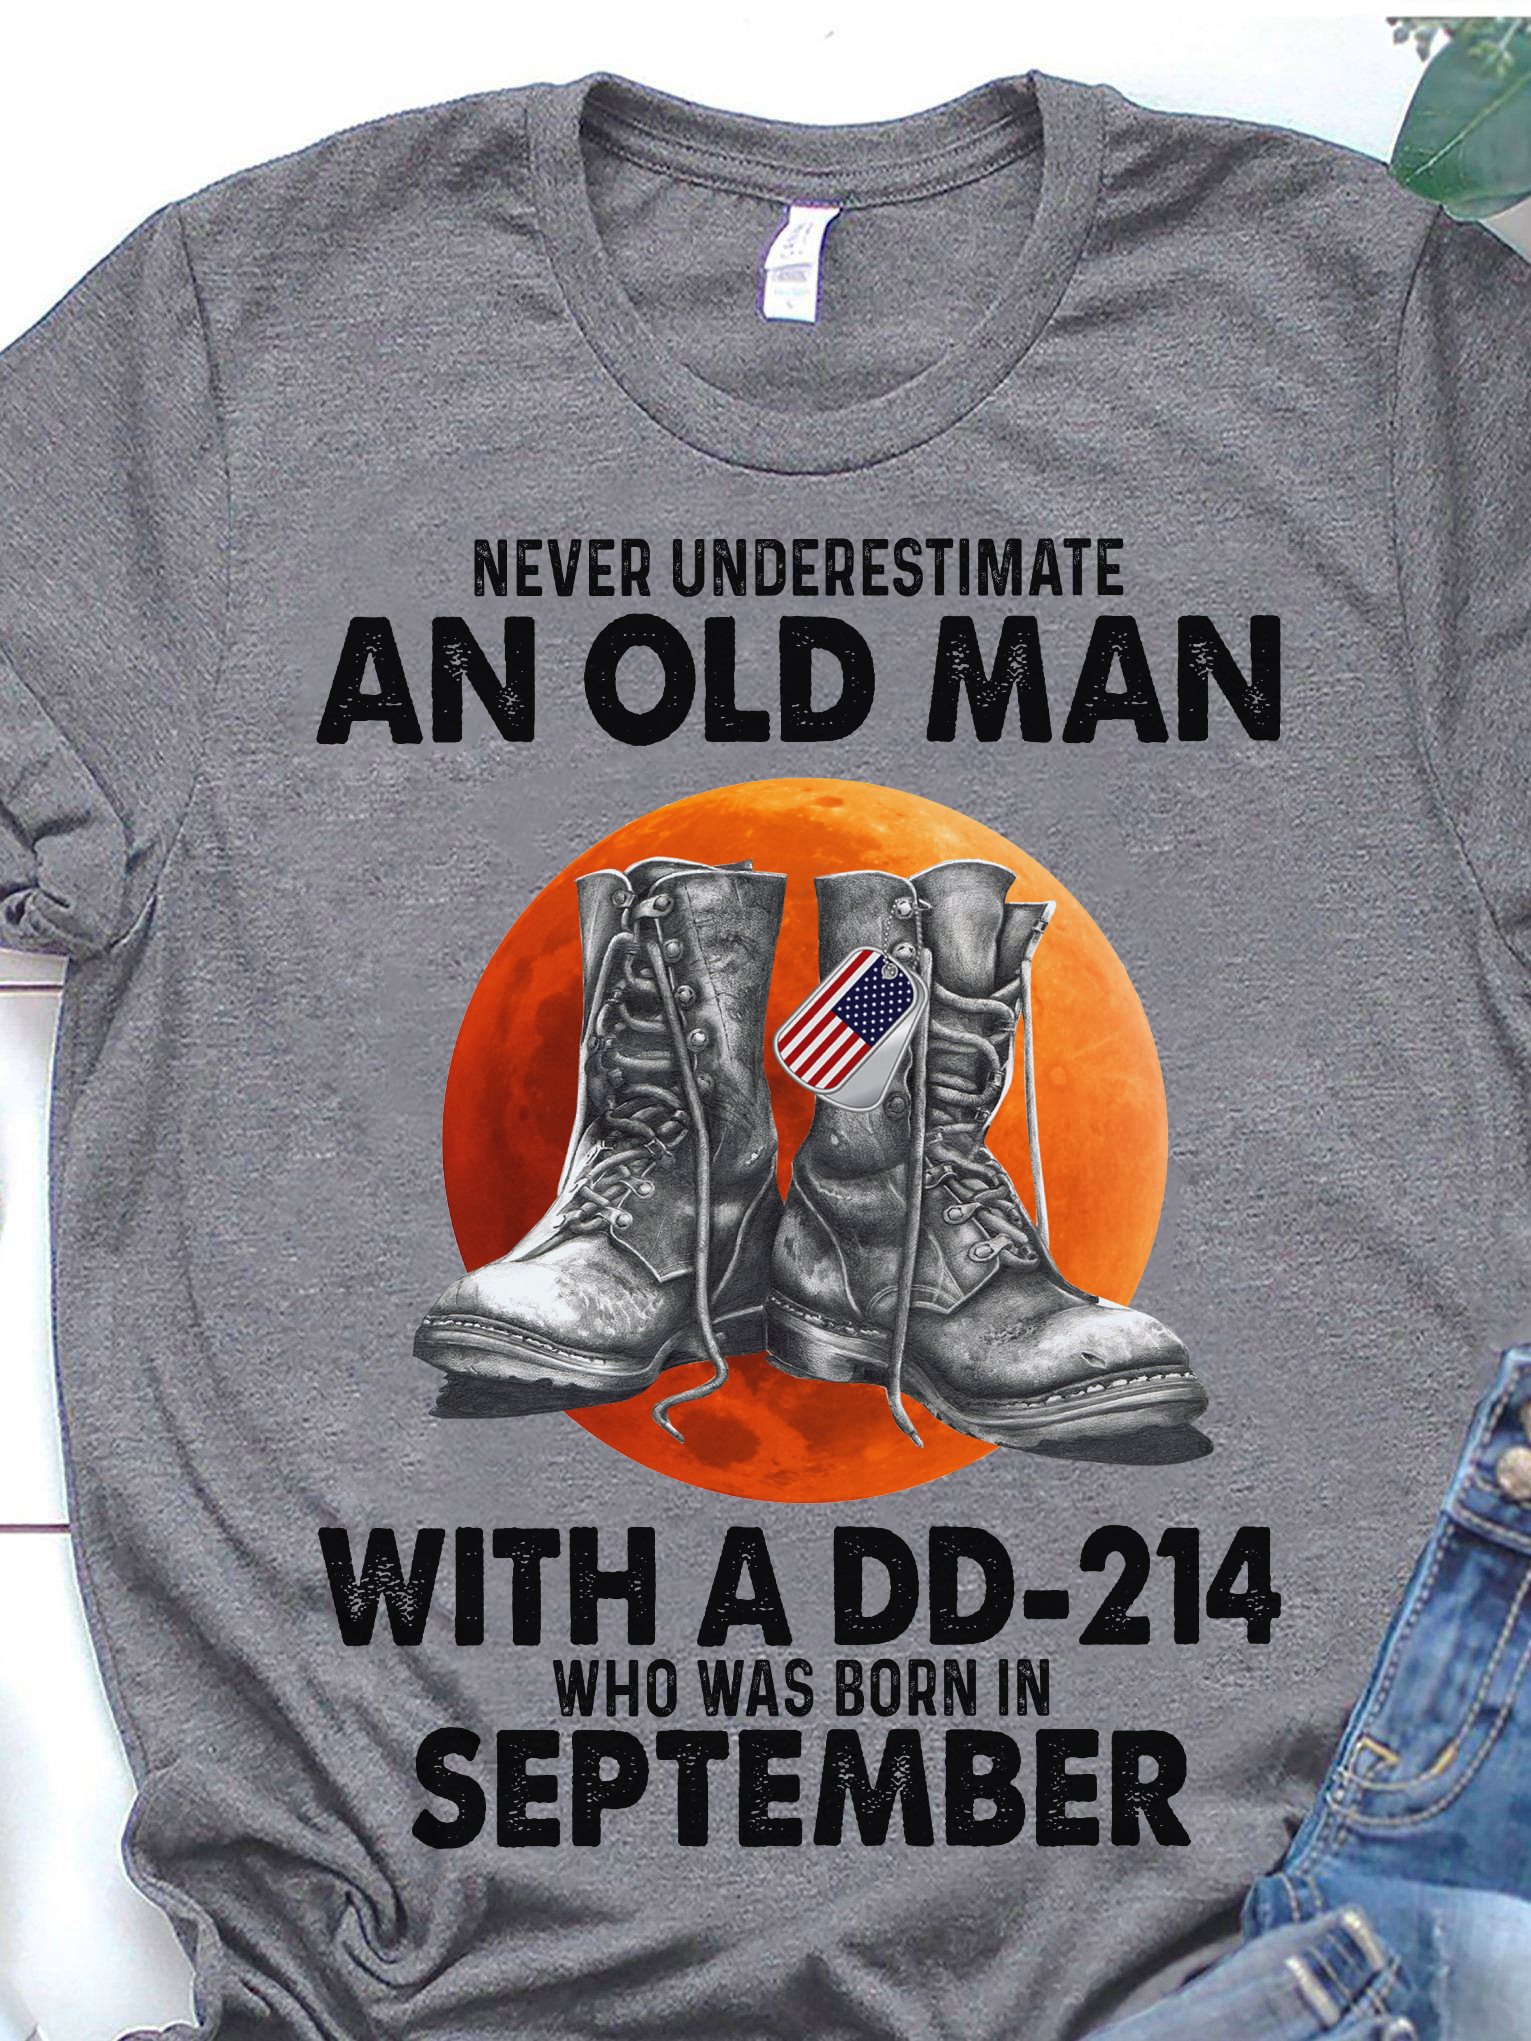 Never underestimate an old man with a dd-214 who was born in September